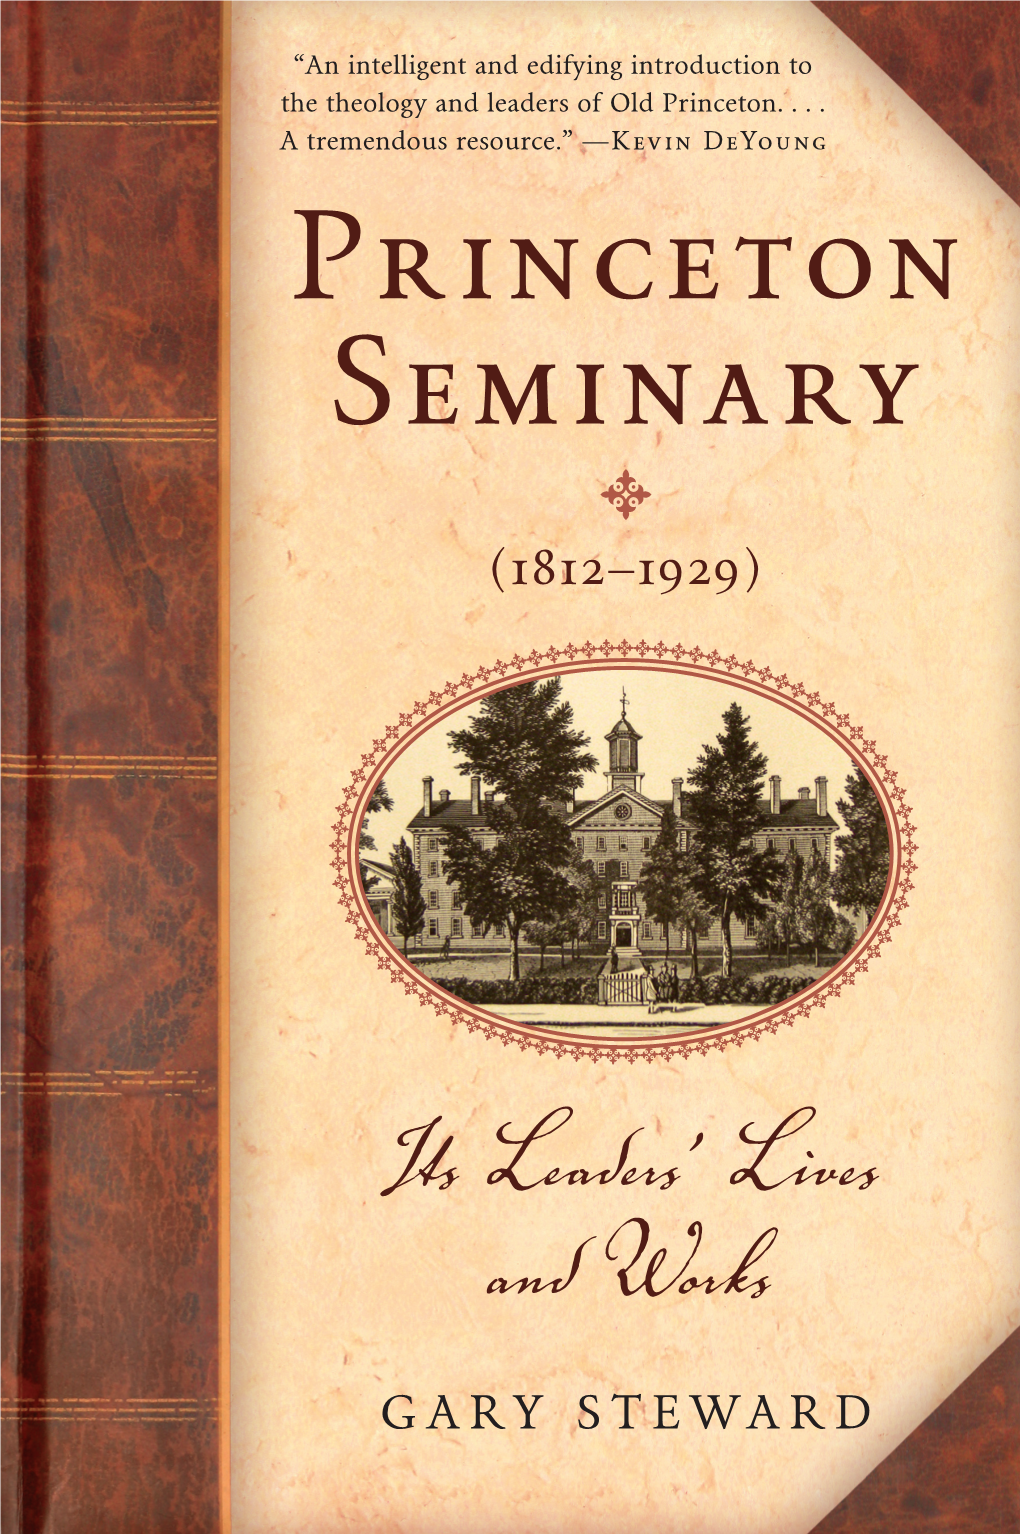 Princeton Seminary’S Leaders for (1812–1929) Its First Hundred Years Was Outstanding, and Steward Tells Their Story Well